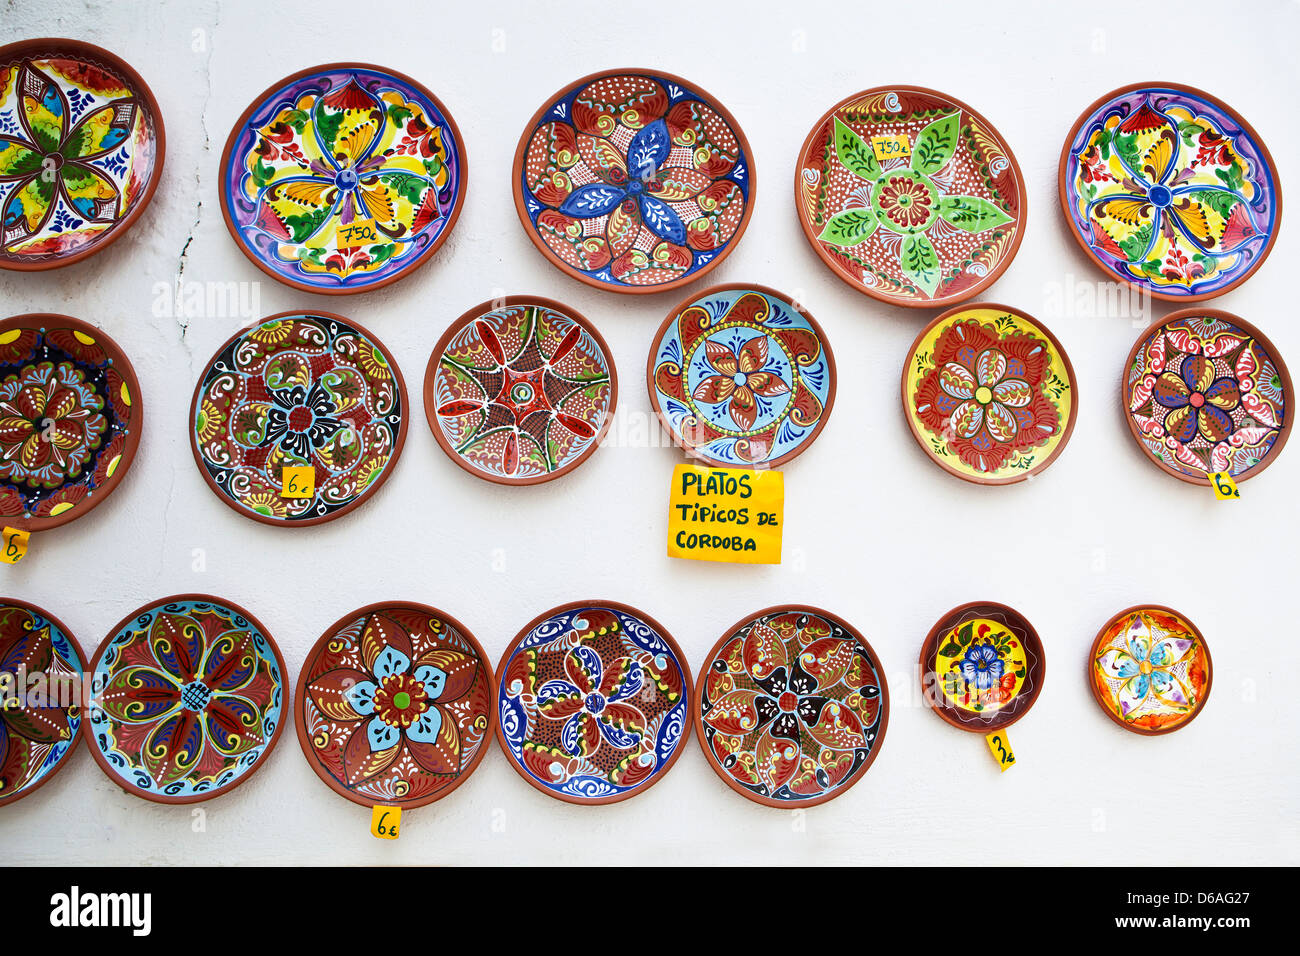 souvenir s in a shop  of typical painted dishes of Cordoba Unesco World Heritage site Stock Photo